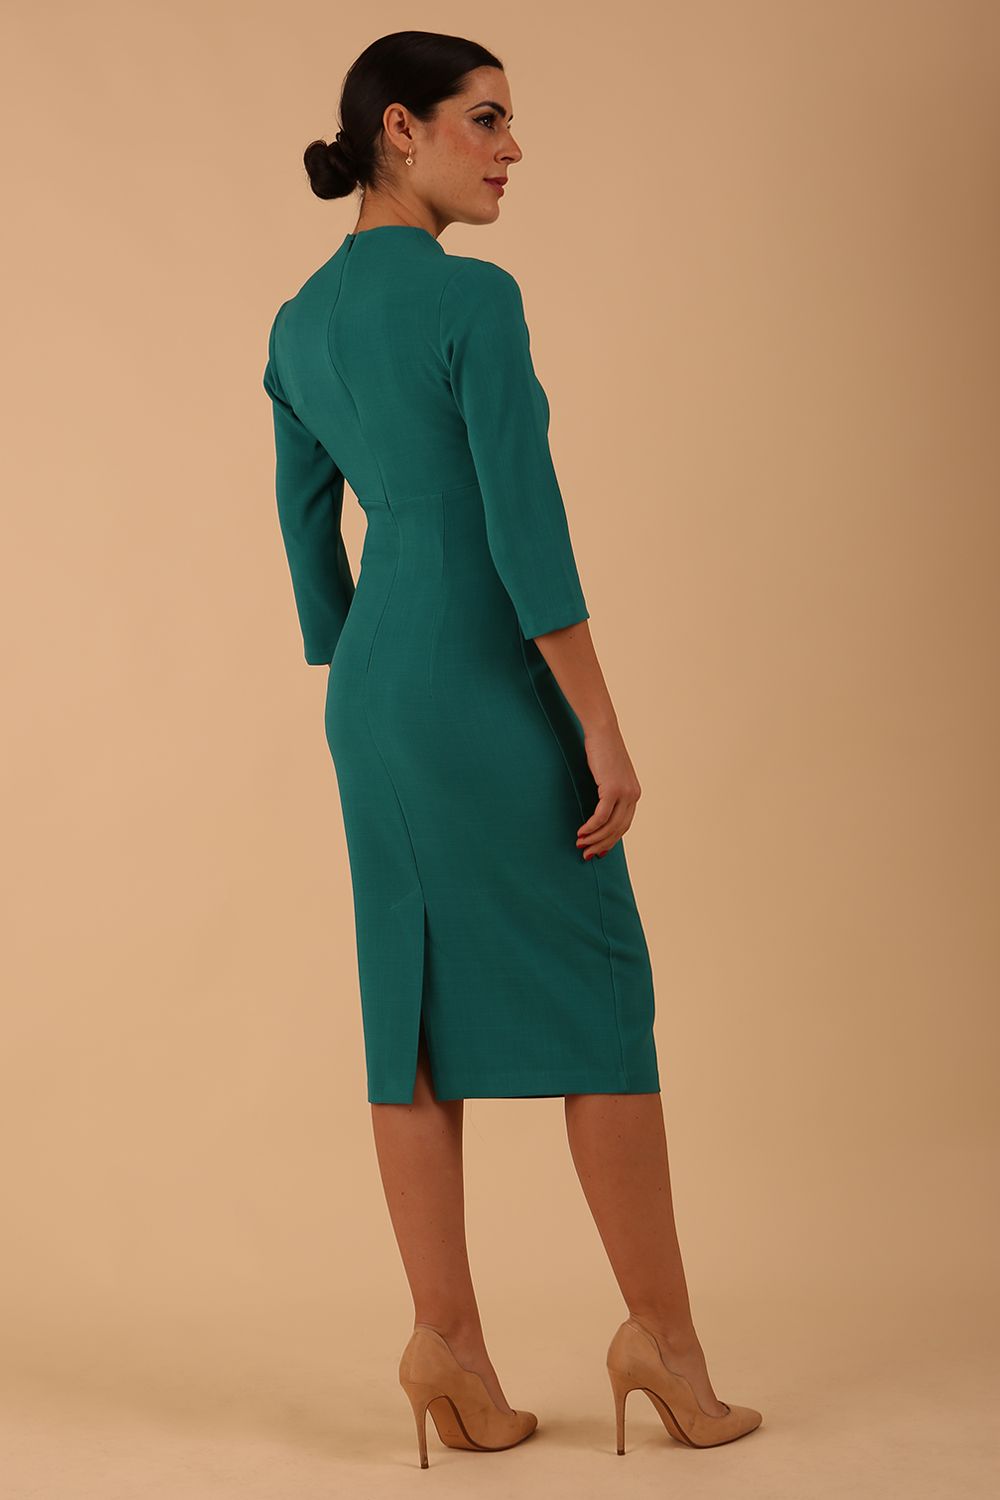 model is wearing diva catwalk plaza sheath dress with high neck Trapezium neckline cutout and three quarter sleeve pretty dress in parasailing green colour